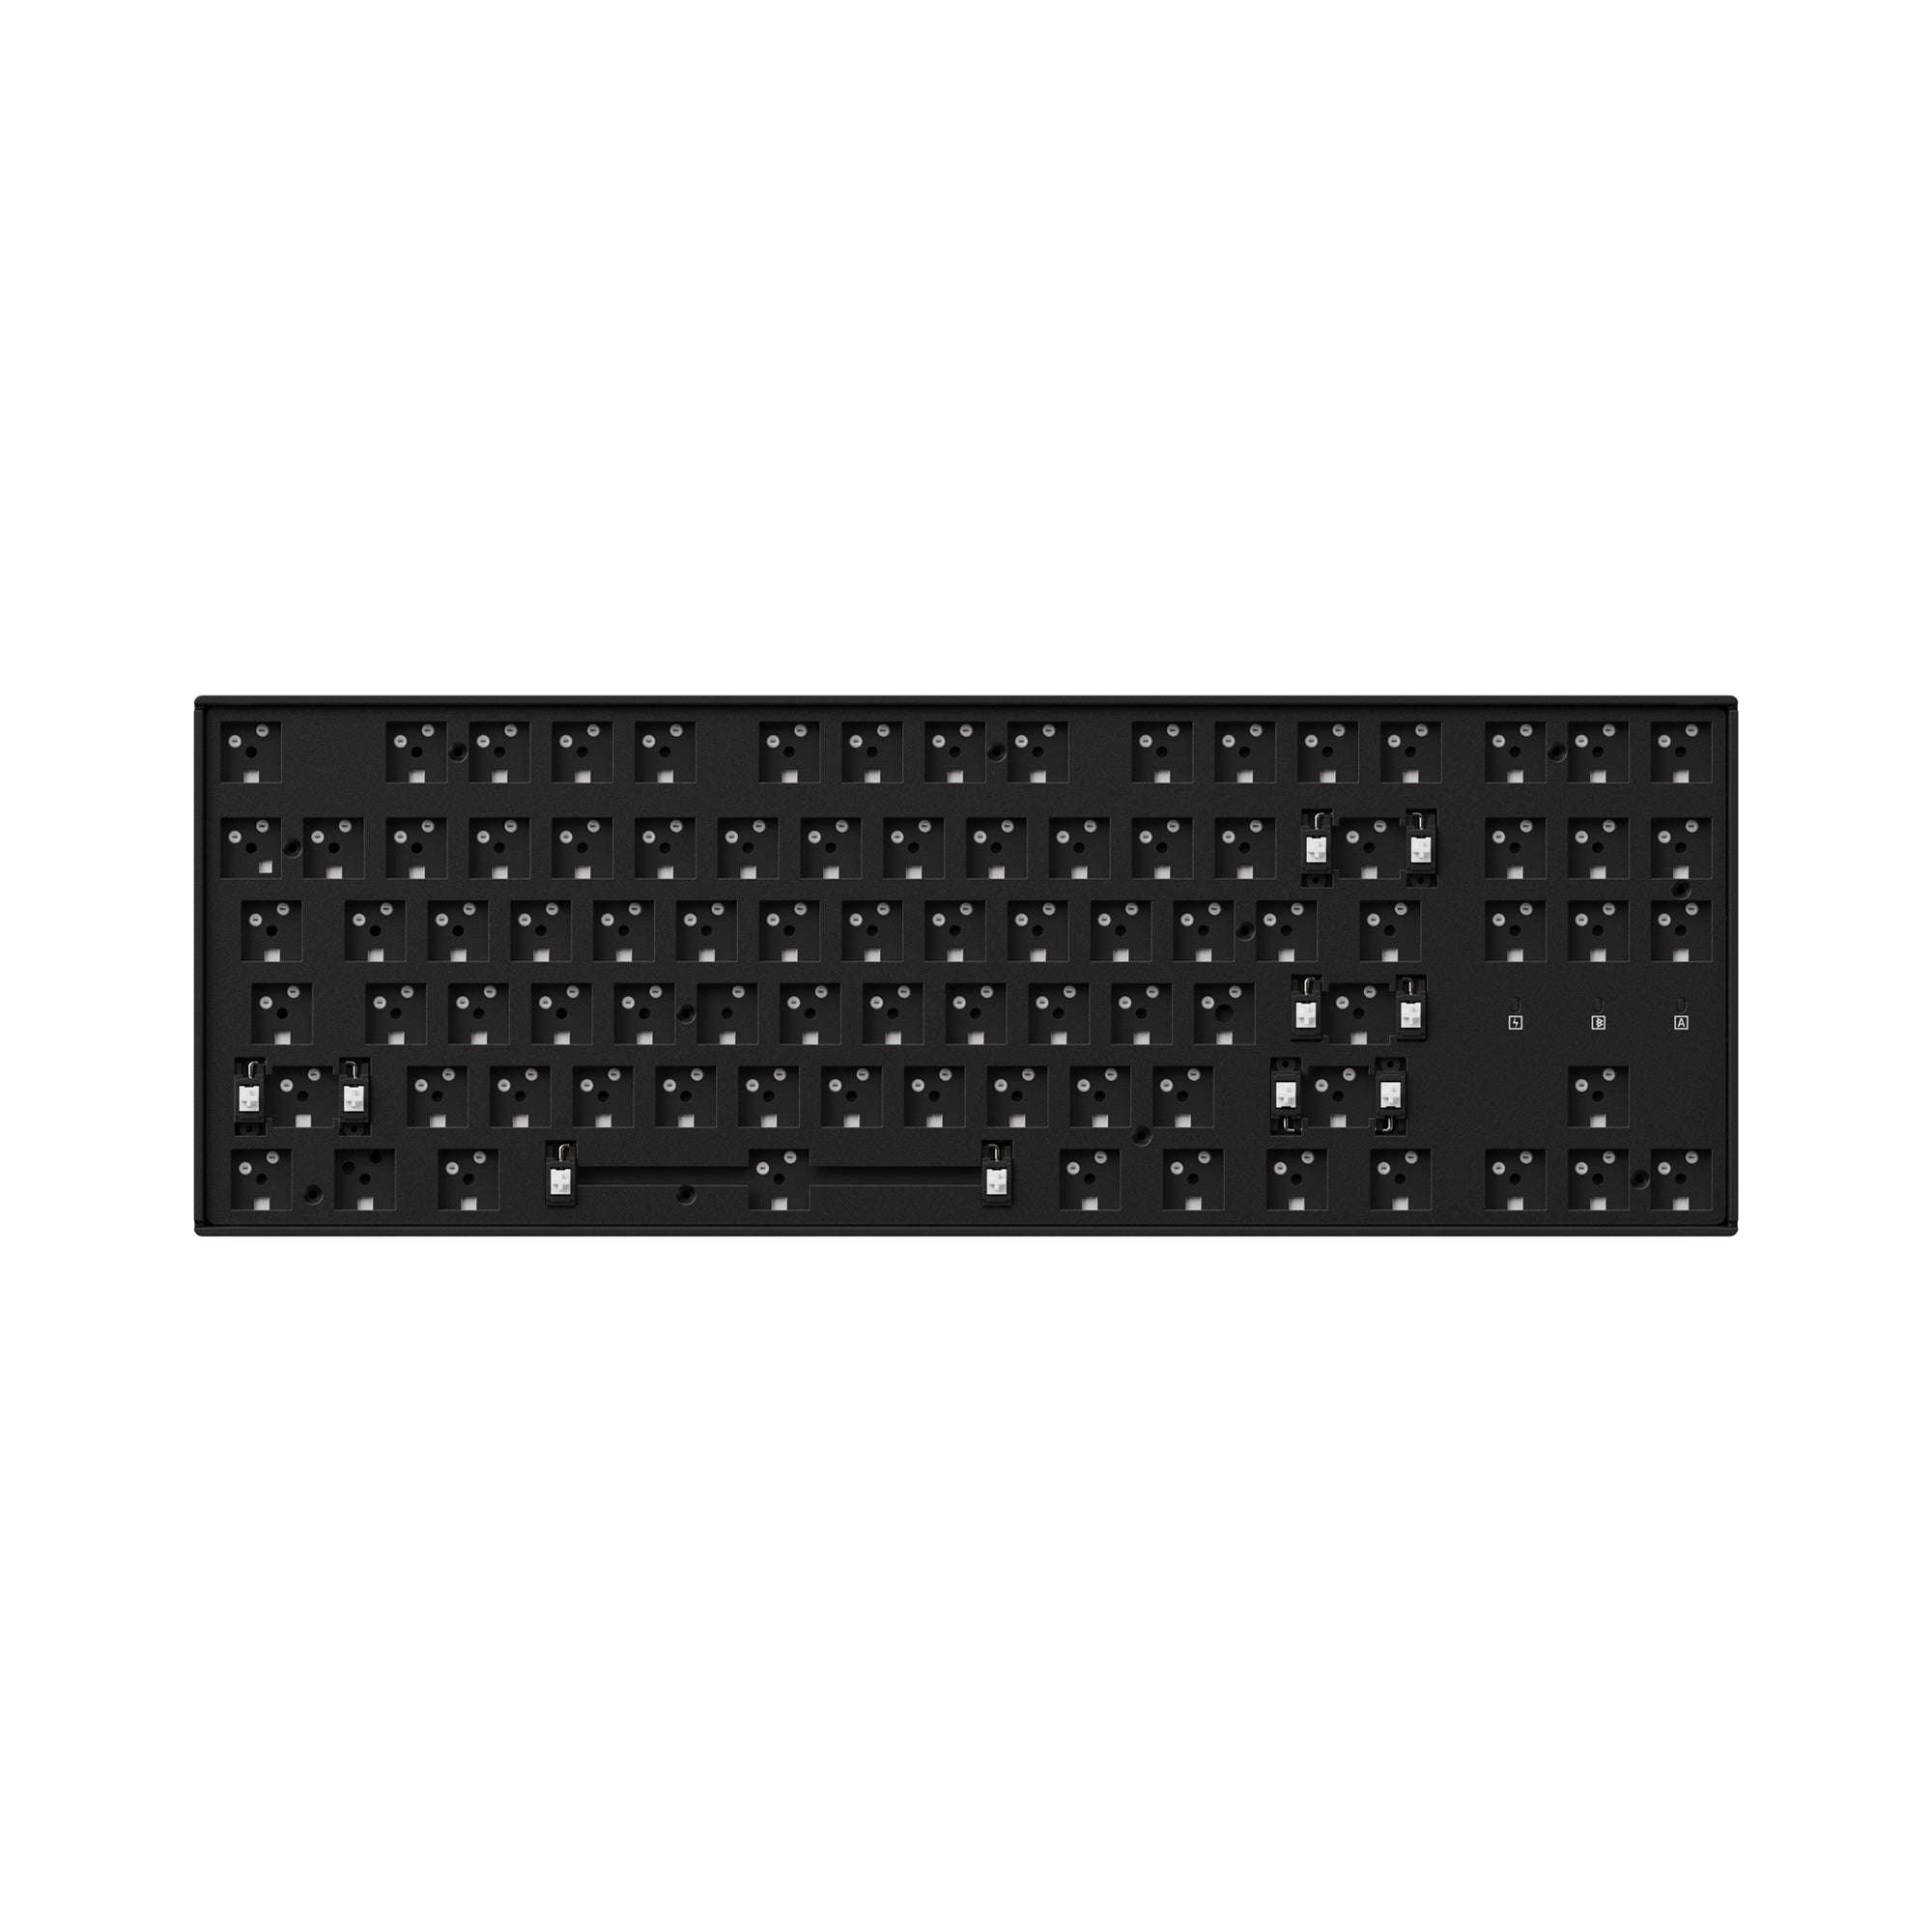 Keychron K8 Pro QMK/VIA Wireless Mechanical Keyboard for Mac and Windows Barebone ANSI US layout with PCB screw-in stabilizer and hot-swappable with MX Gateron Cherry Panda Kailh switches with RGB backlight